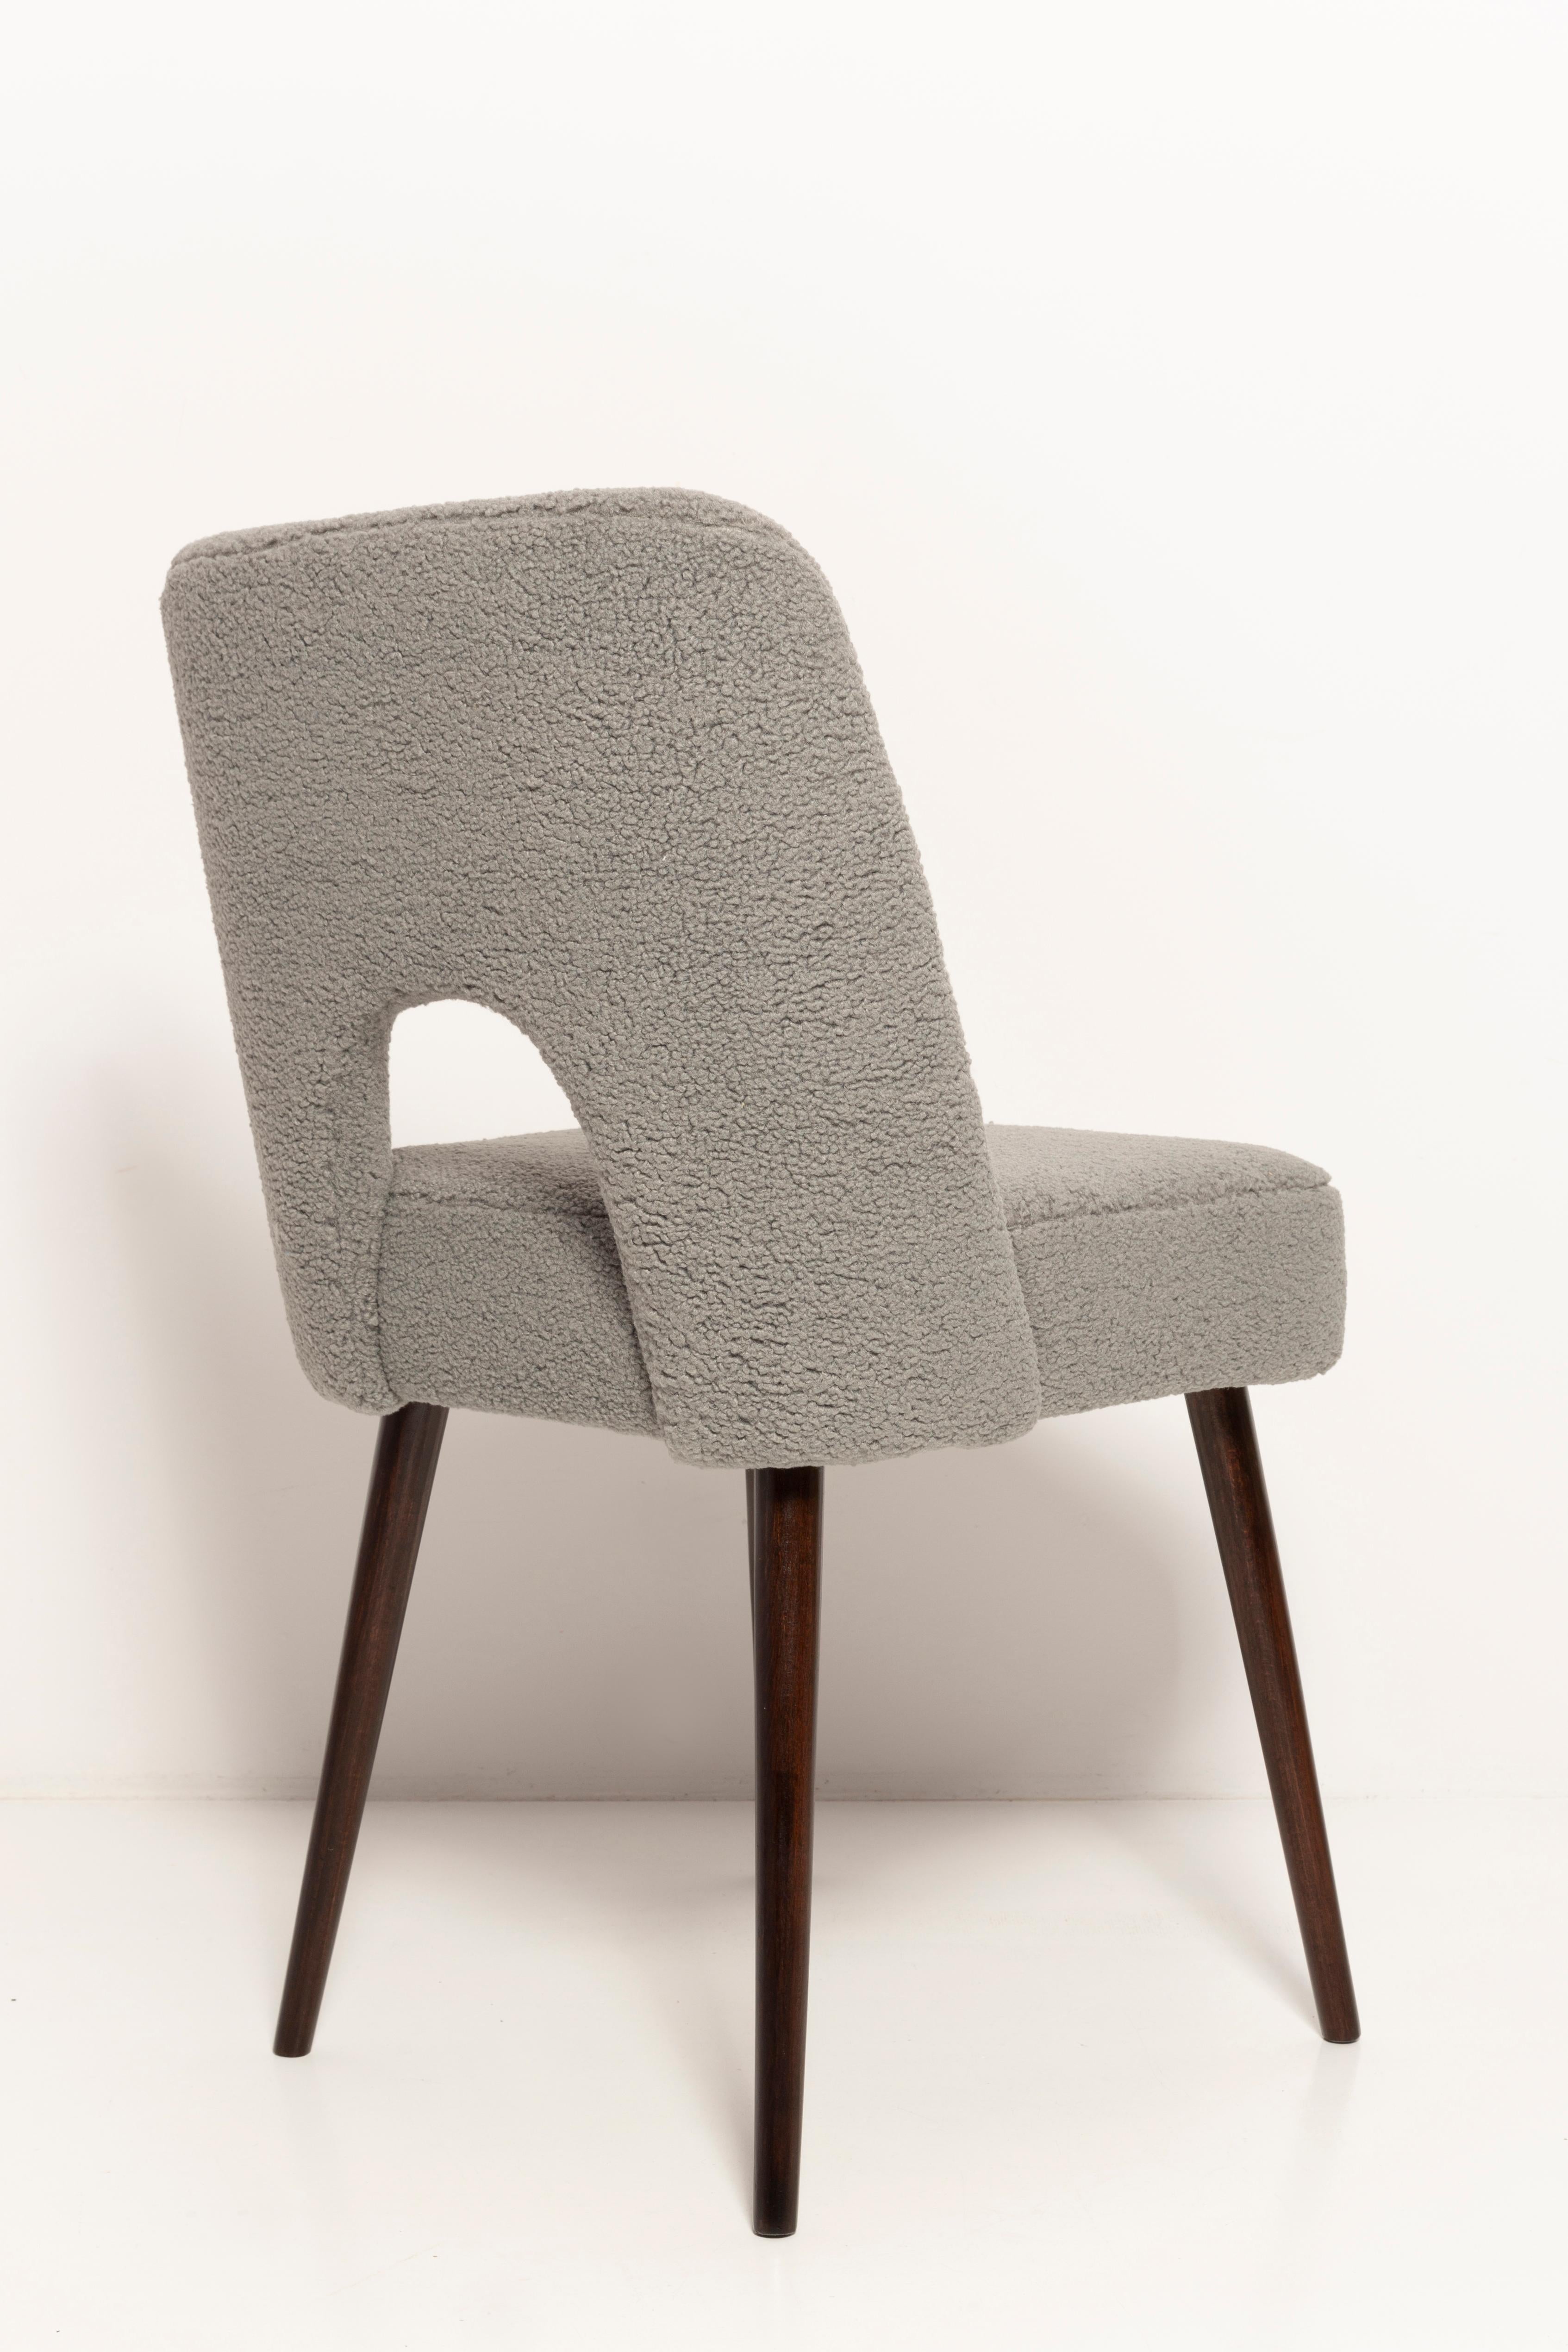 Textile Gray Boucle 'Shell' Chair, Europe, 1960s For Sale